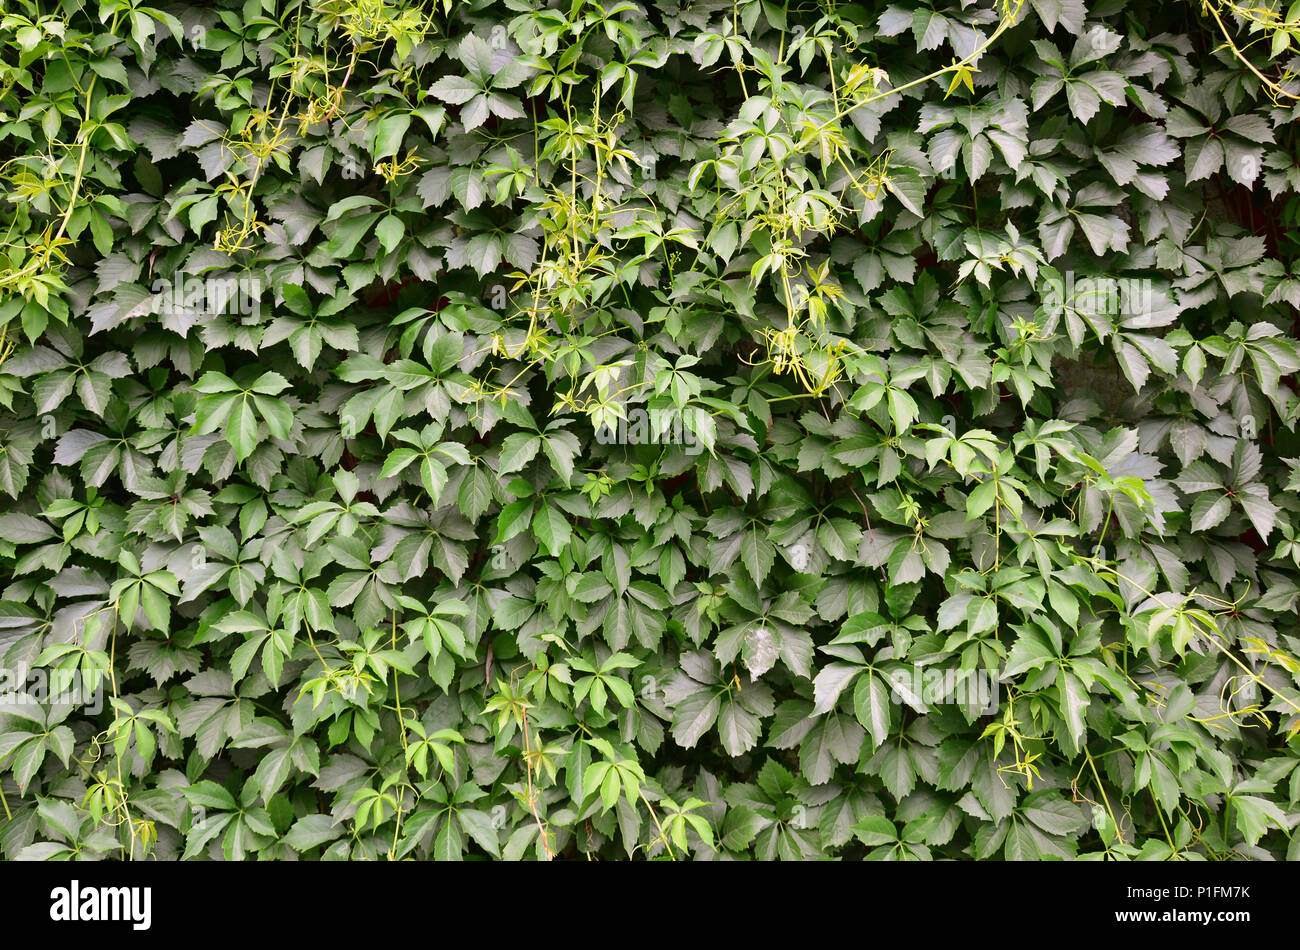 The texture of a lot of flowering green vines from wild ivy that